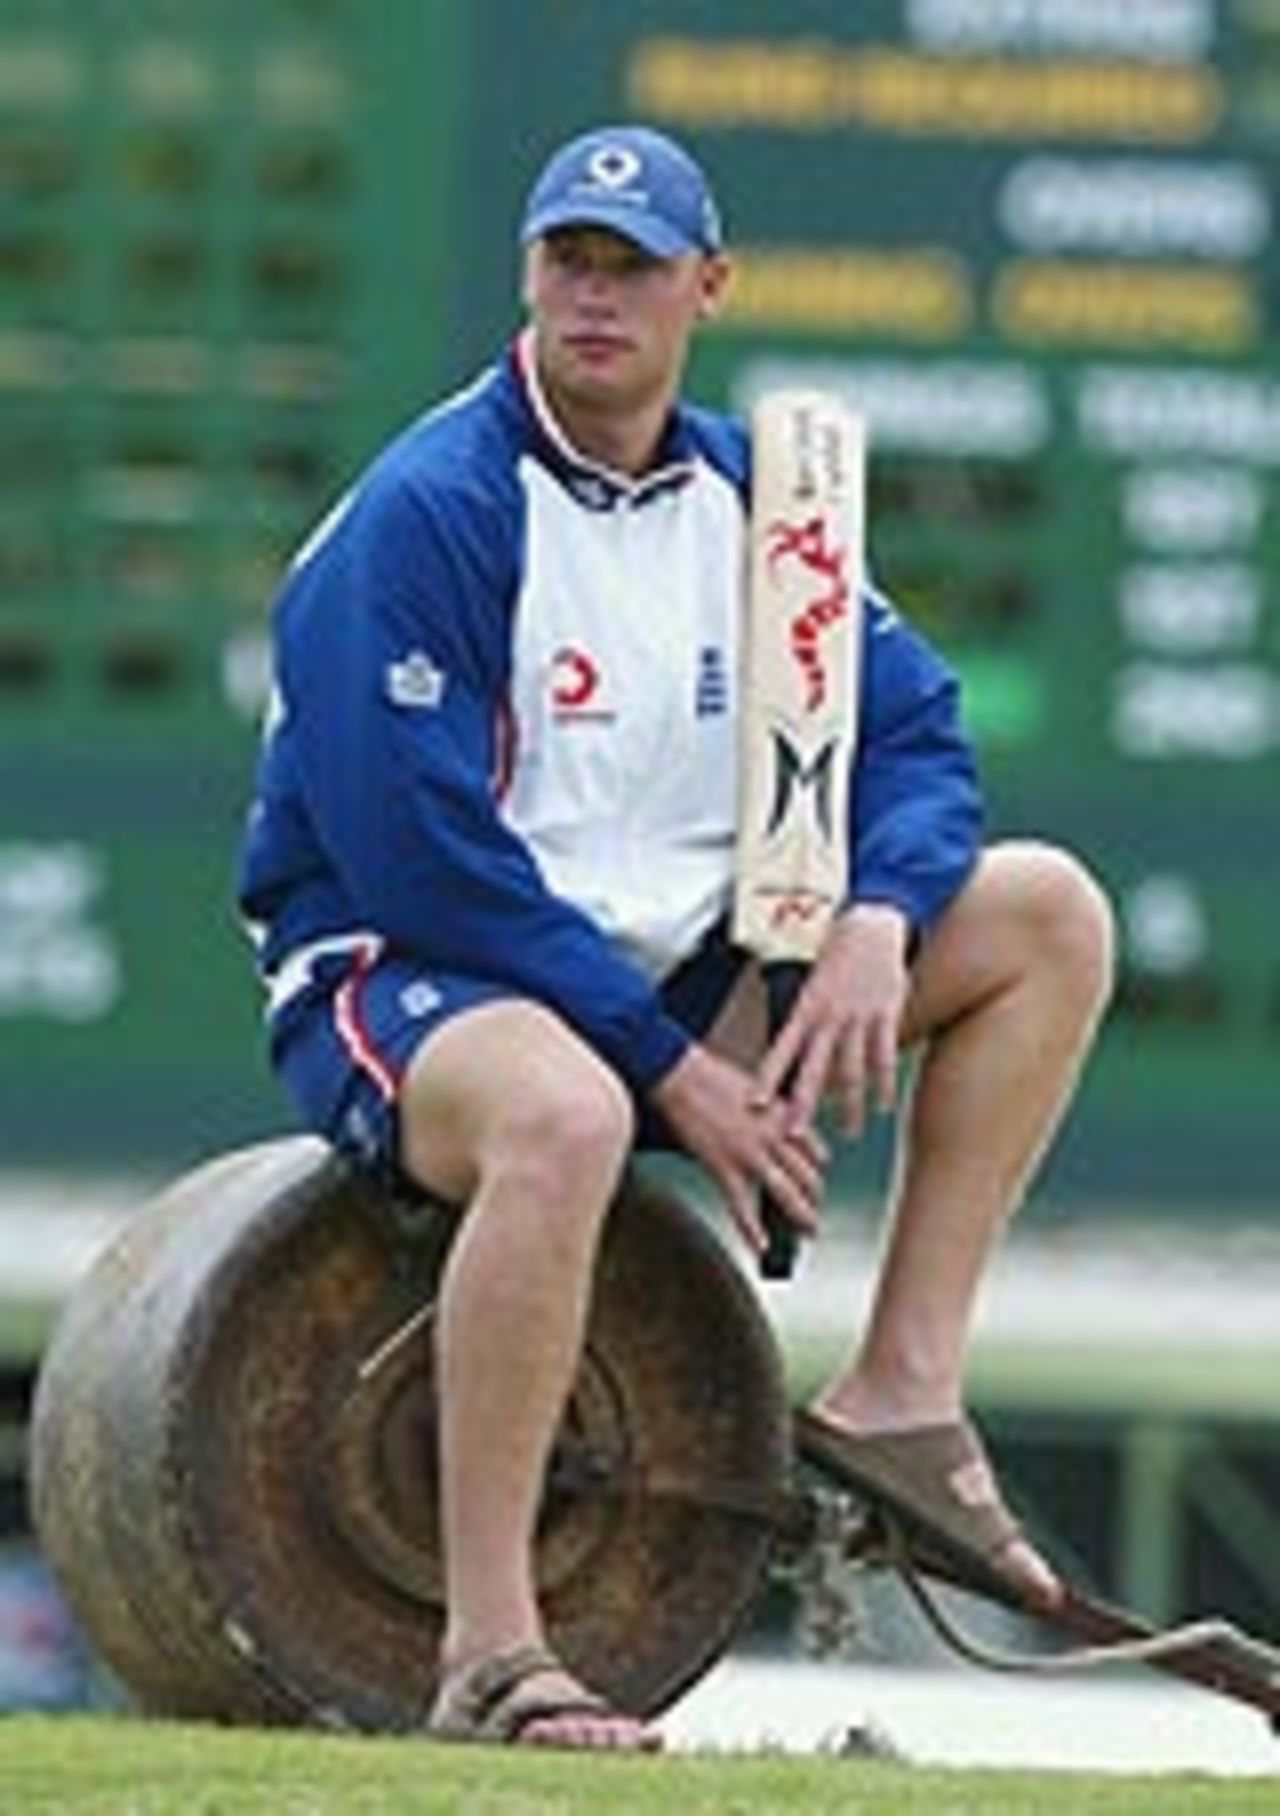 Andrew Flintoff sitting on a roller looking pensive, West Indies v England, 7th ODI, Barbados, May 4, 2004